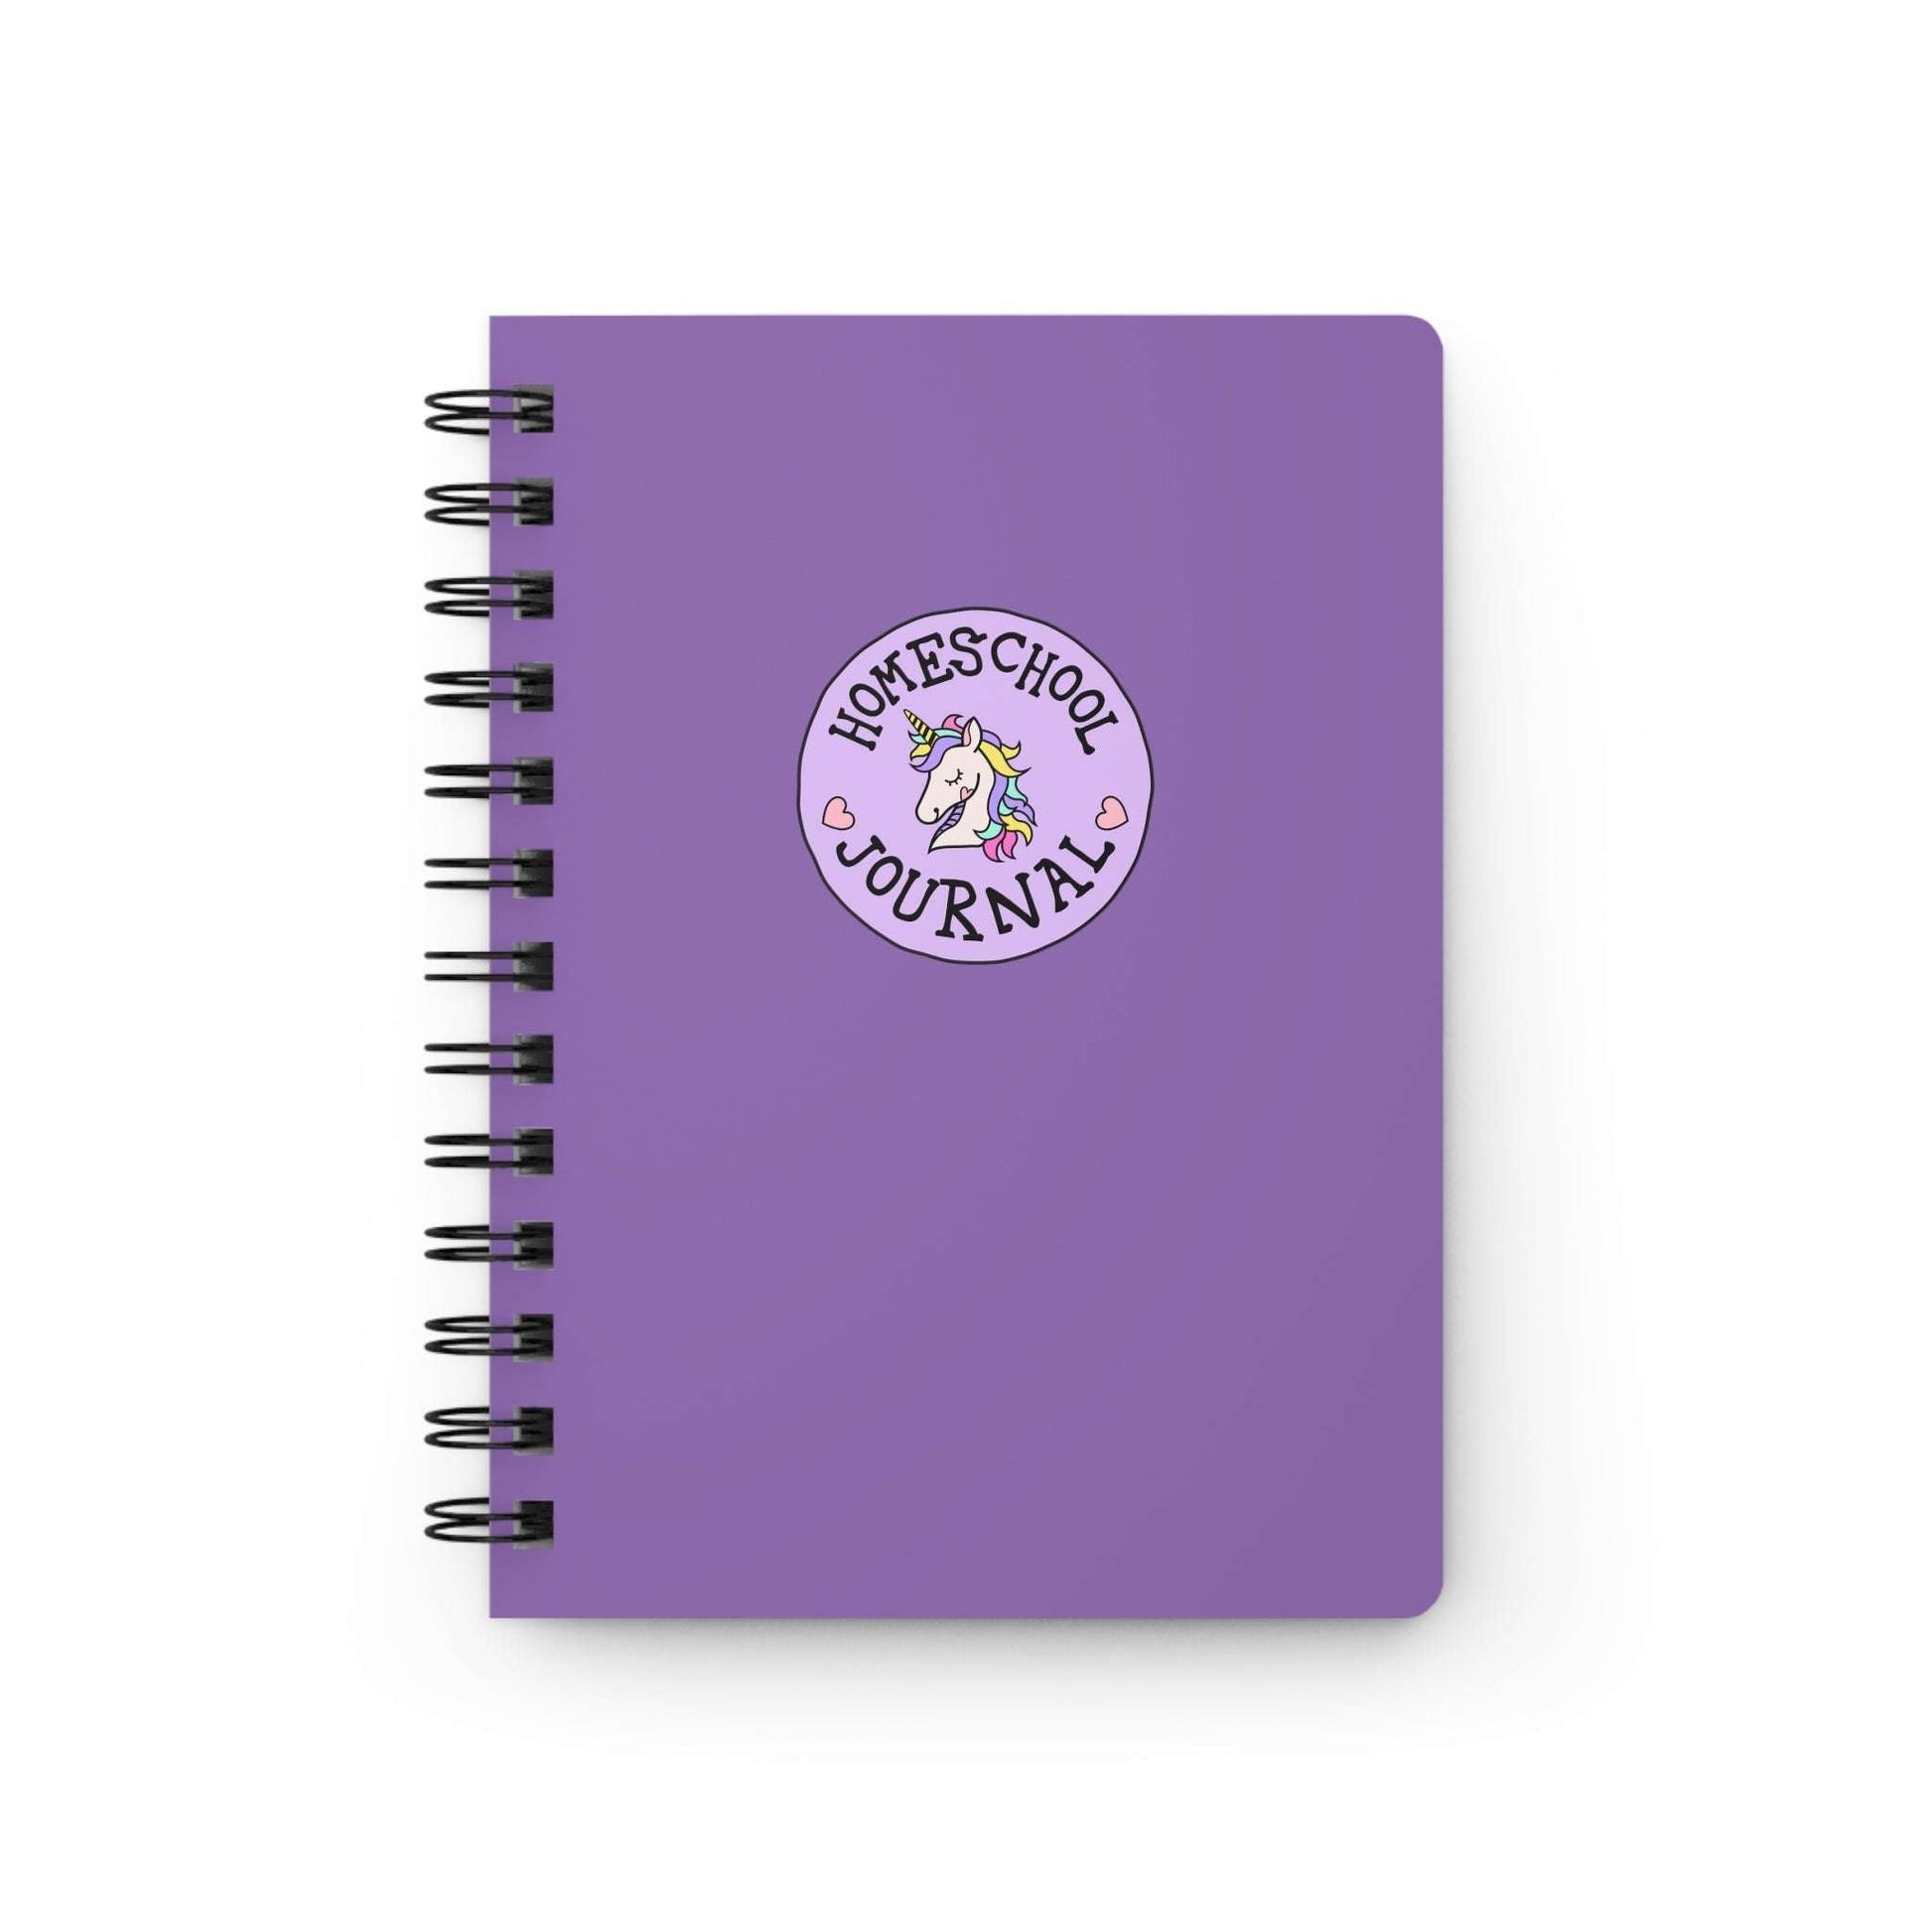 Unicorn Spiral Bound Homeschool JournalWolfe Paw DesignsUnicorn Spiral Bound Homeschool JournalPurple - Unicorn Homeschool lined journal 
Your homeschooler can now write in style with our themed lined journals made for kids just like yours!
Each color has its Unicorn Spiral Bound Homeschool Journal